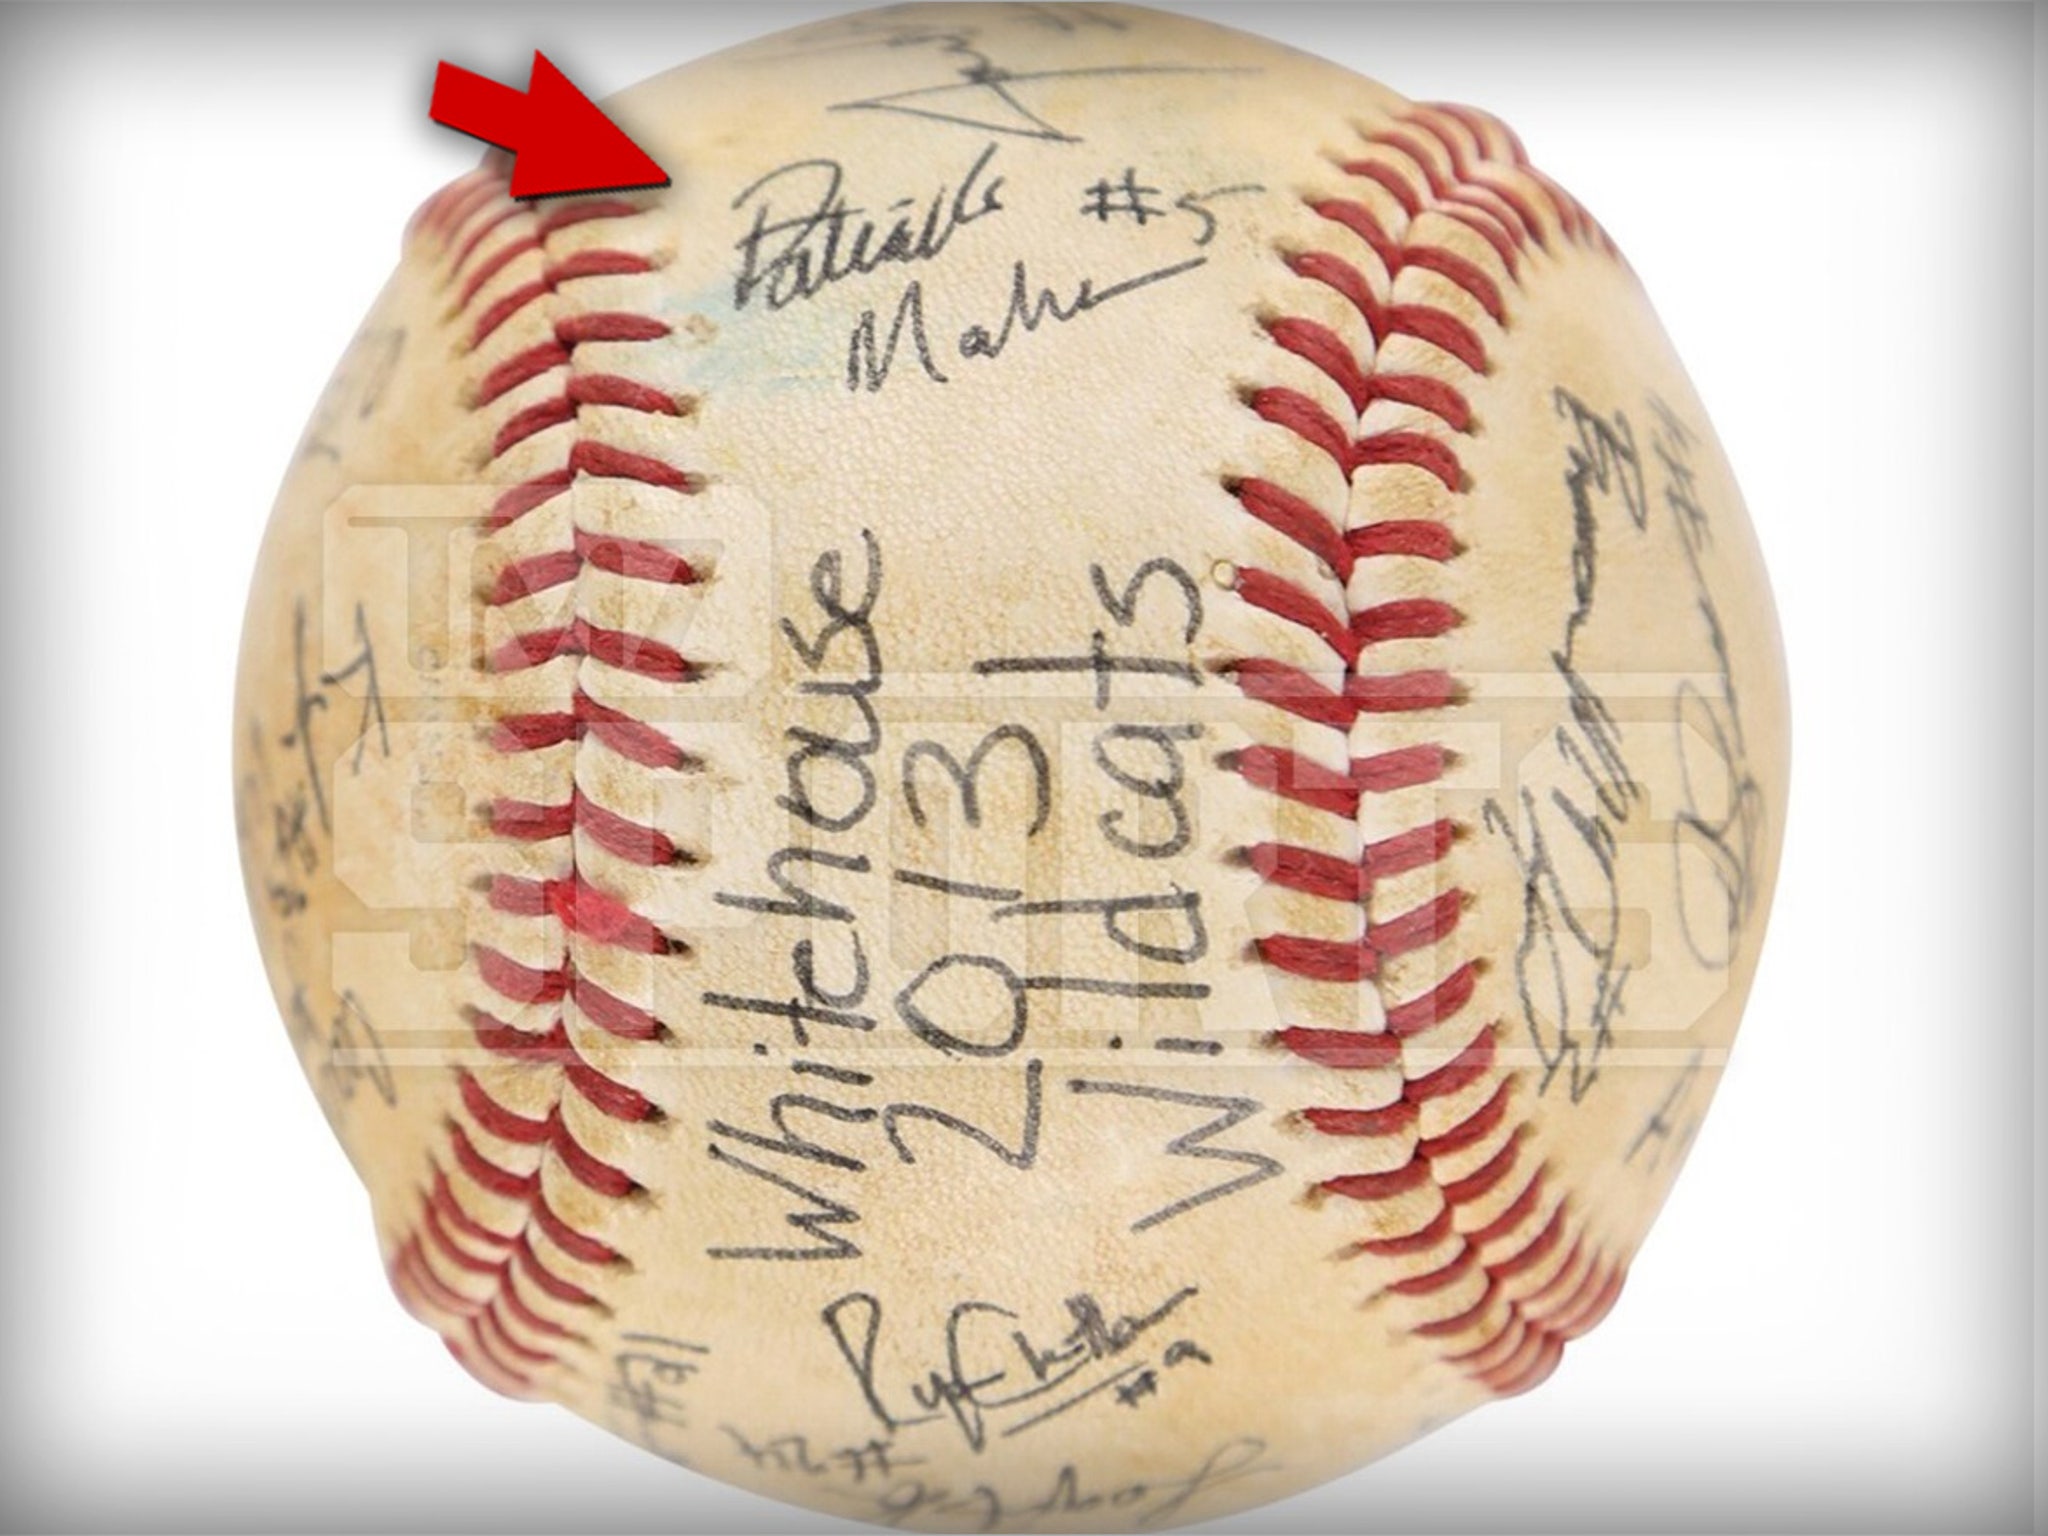 Patrick Mahomes Baseball Autographed In H.S. Hits Auction, 2013 Signature!